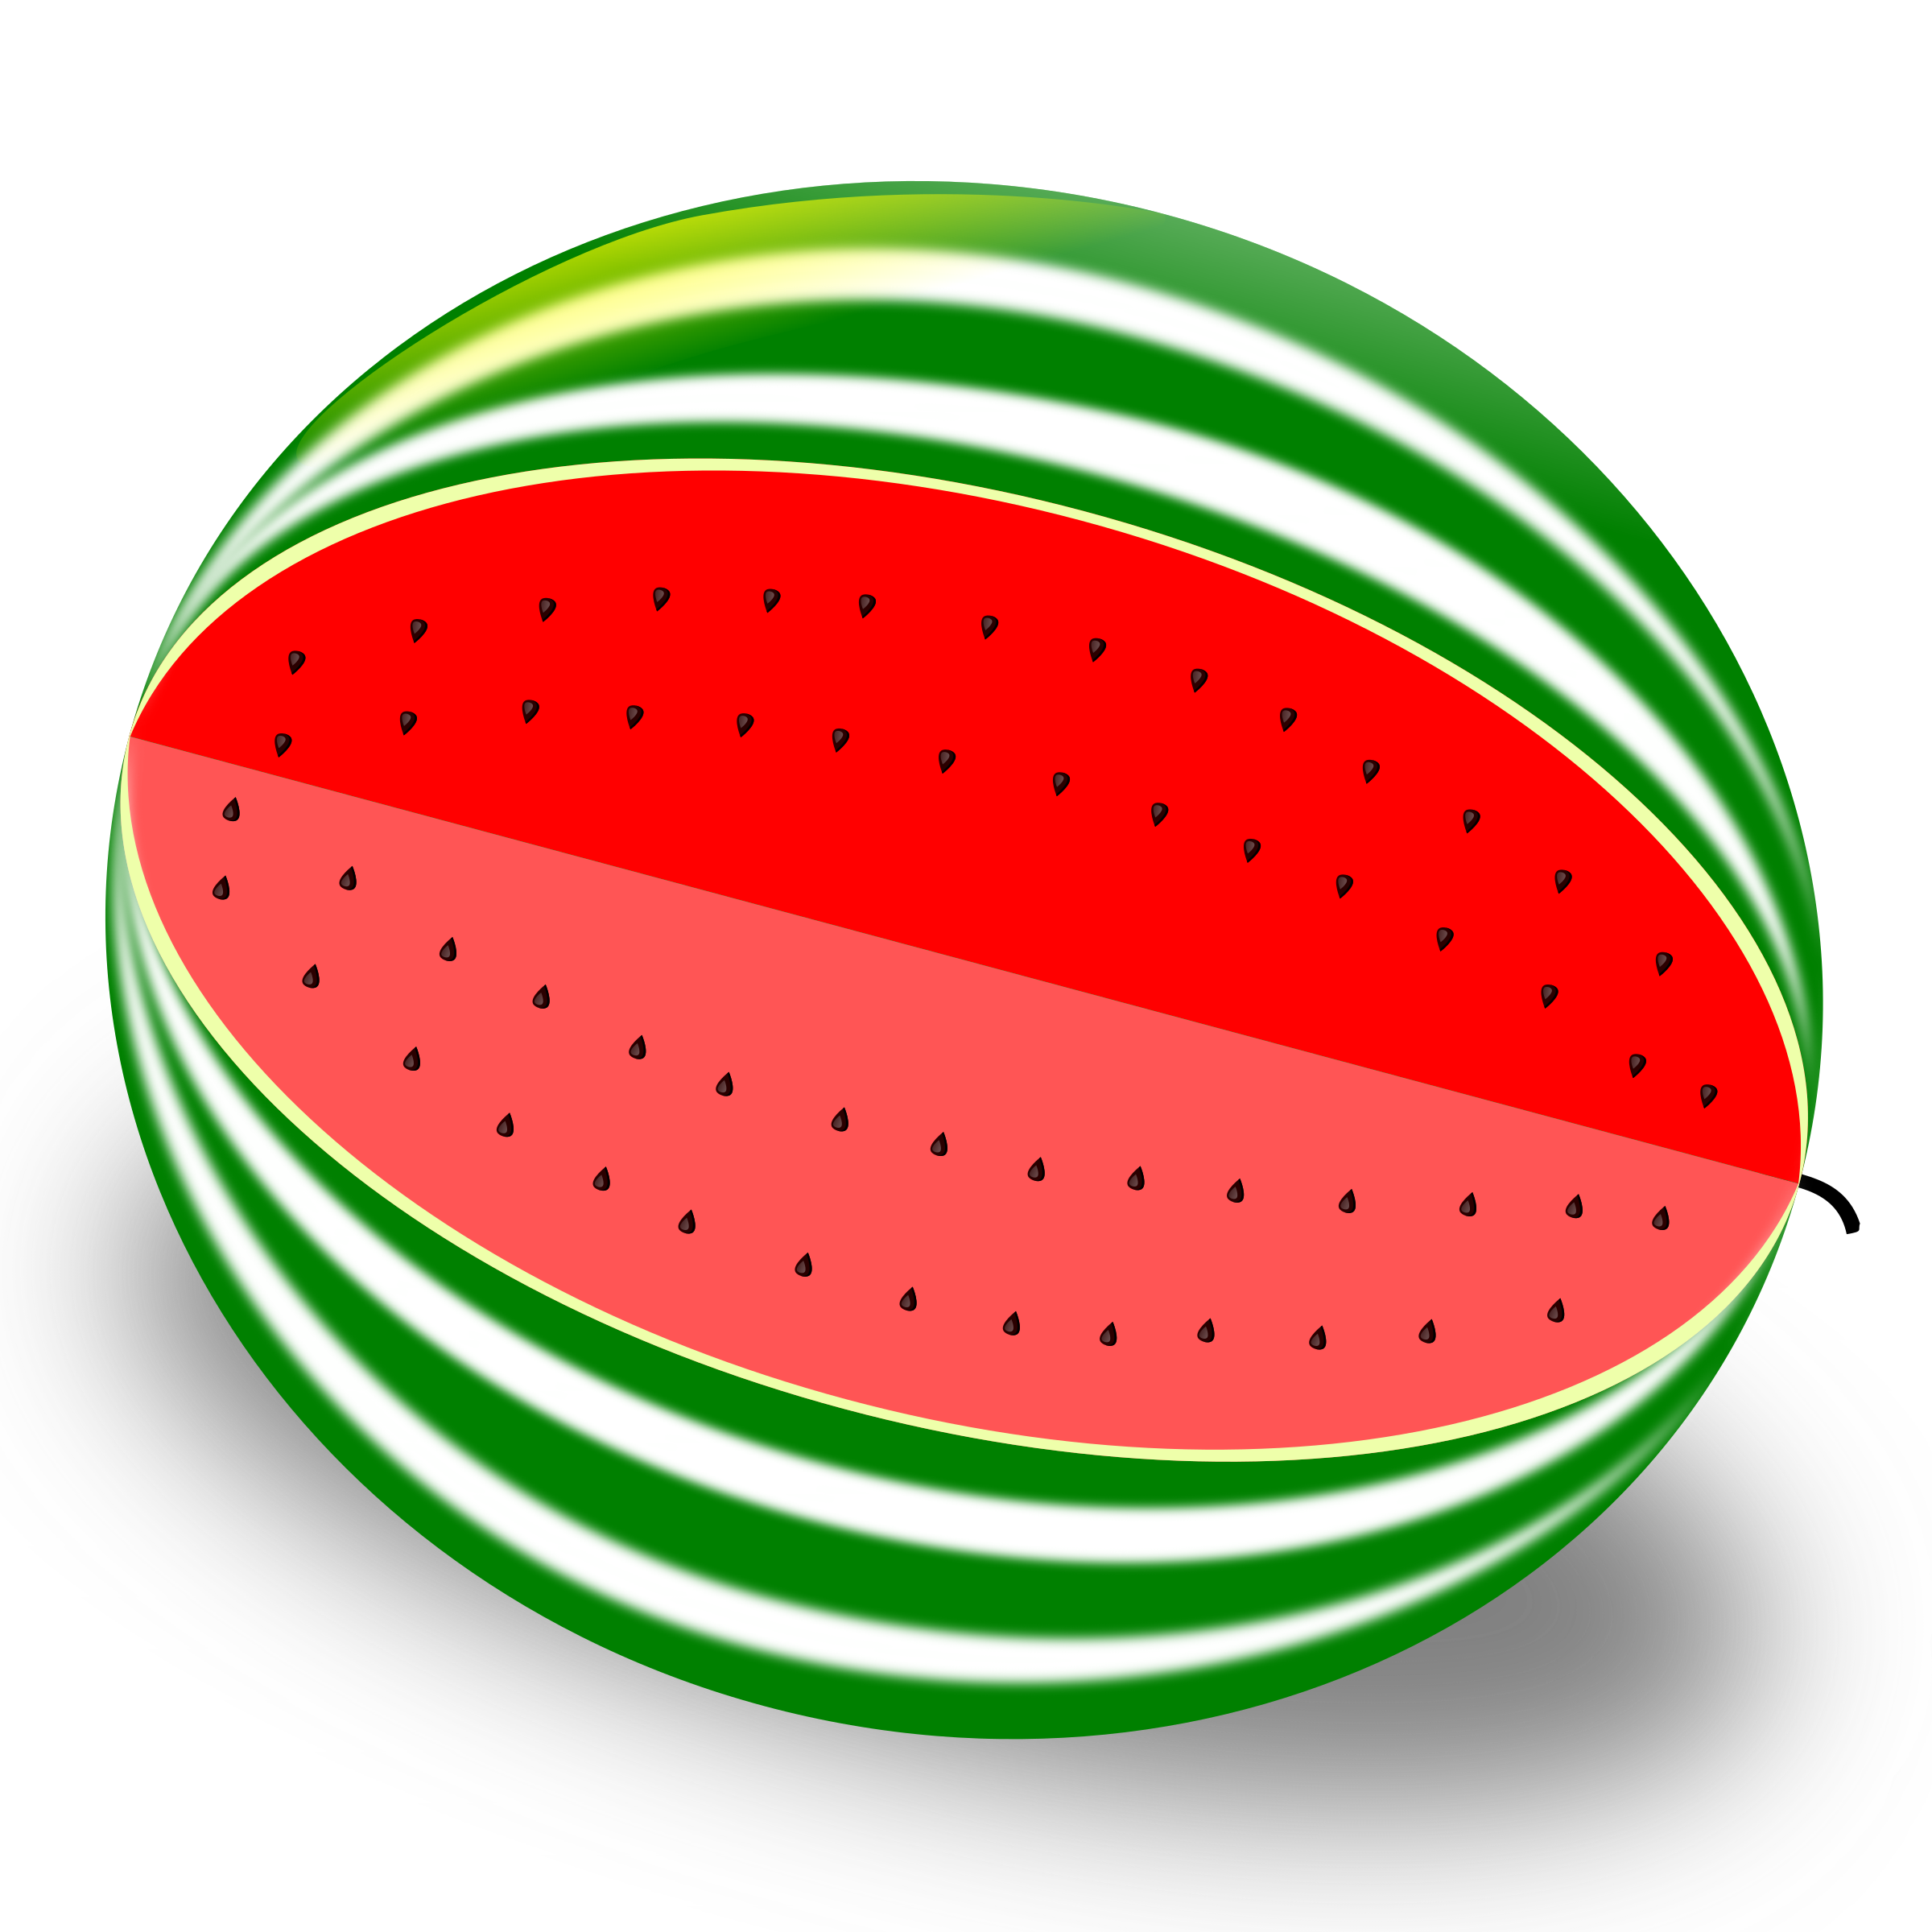 Download Watermelon Vector clipart image - Free stock photo ...